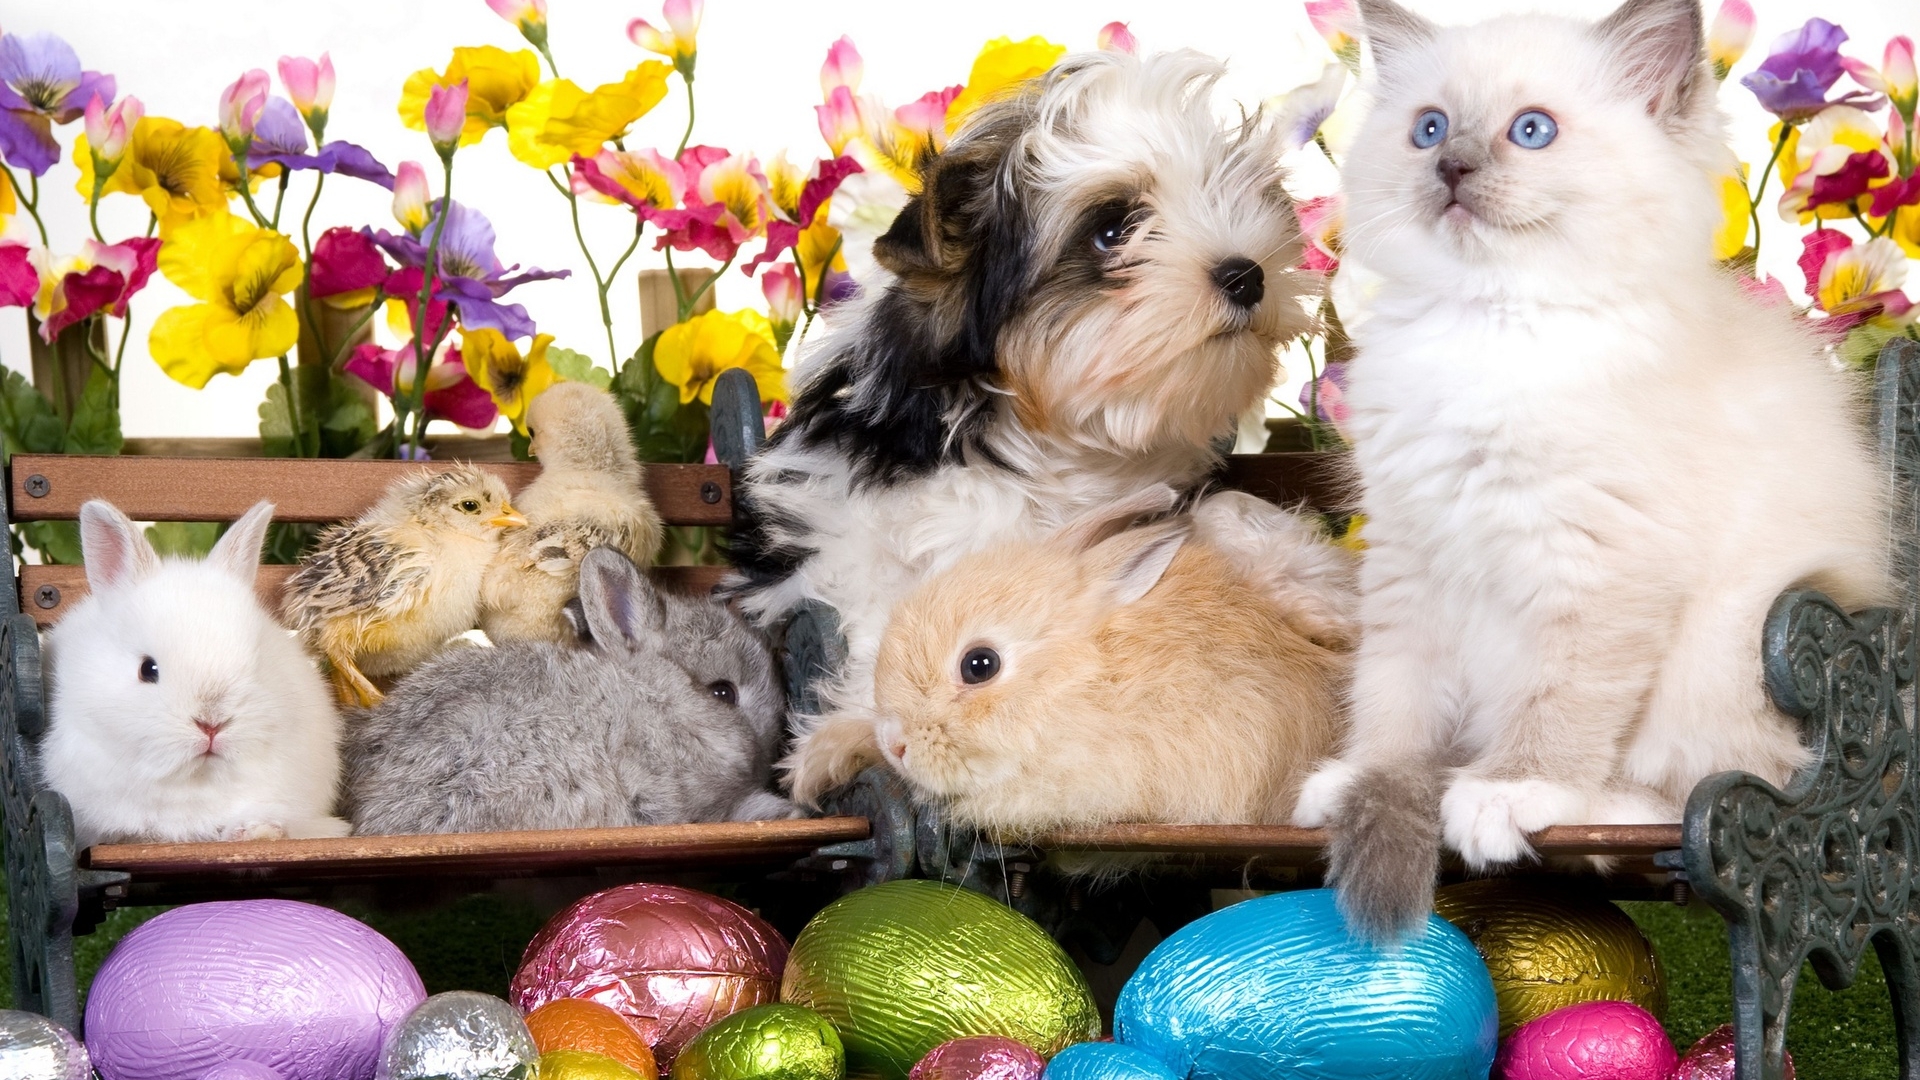 Free download Easter Cat Wallpaper HD Easter Image 1920x1200